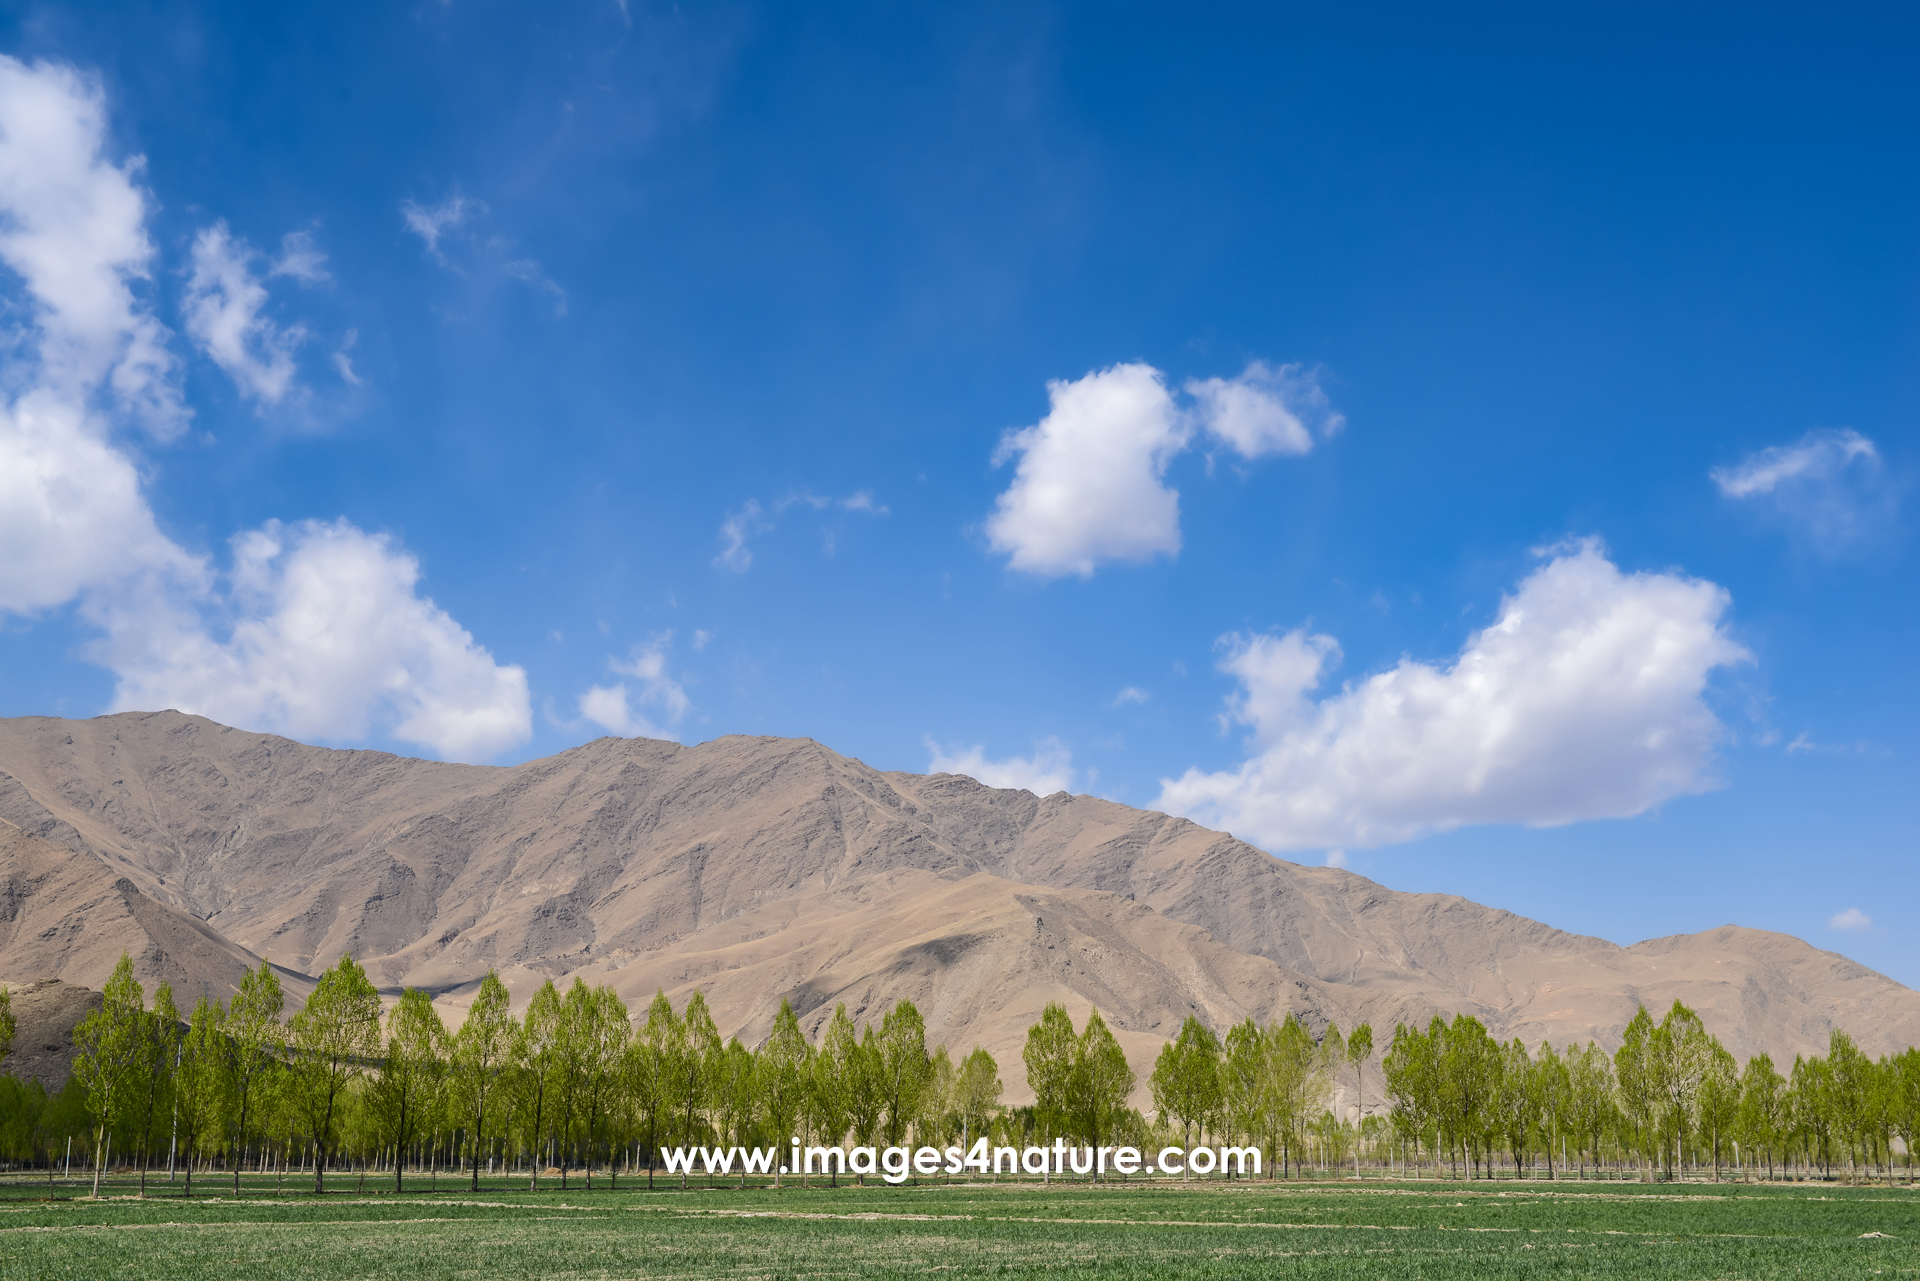 Scenic view of a valley in Tibet in spring with trees showing first green leaves